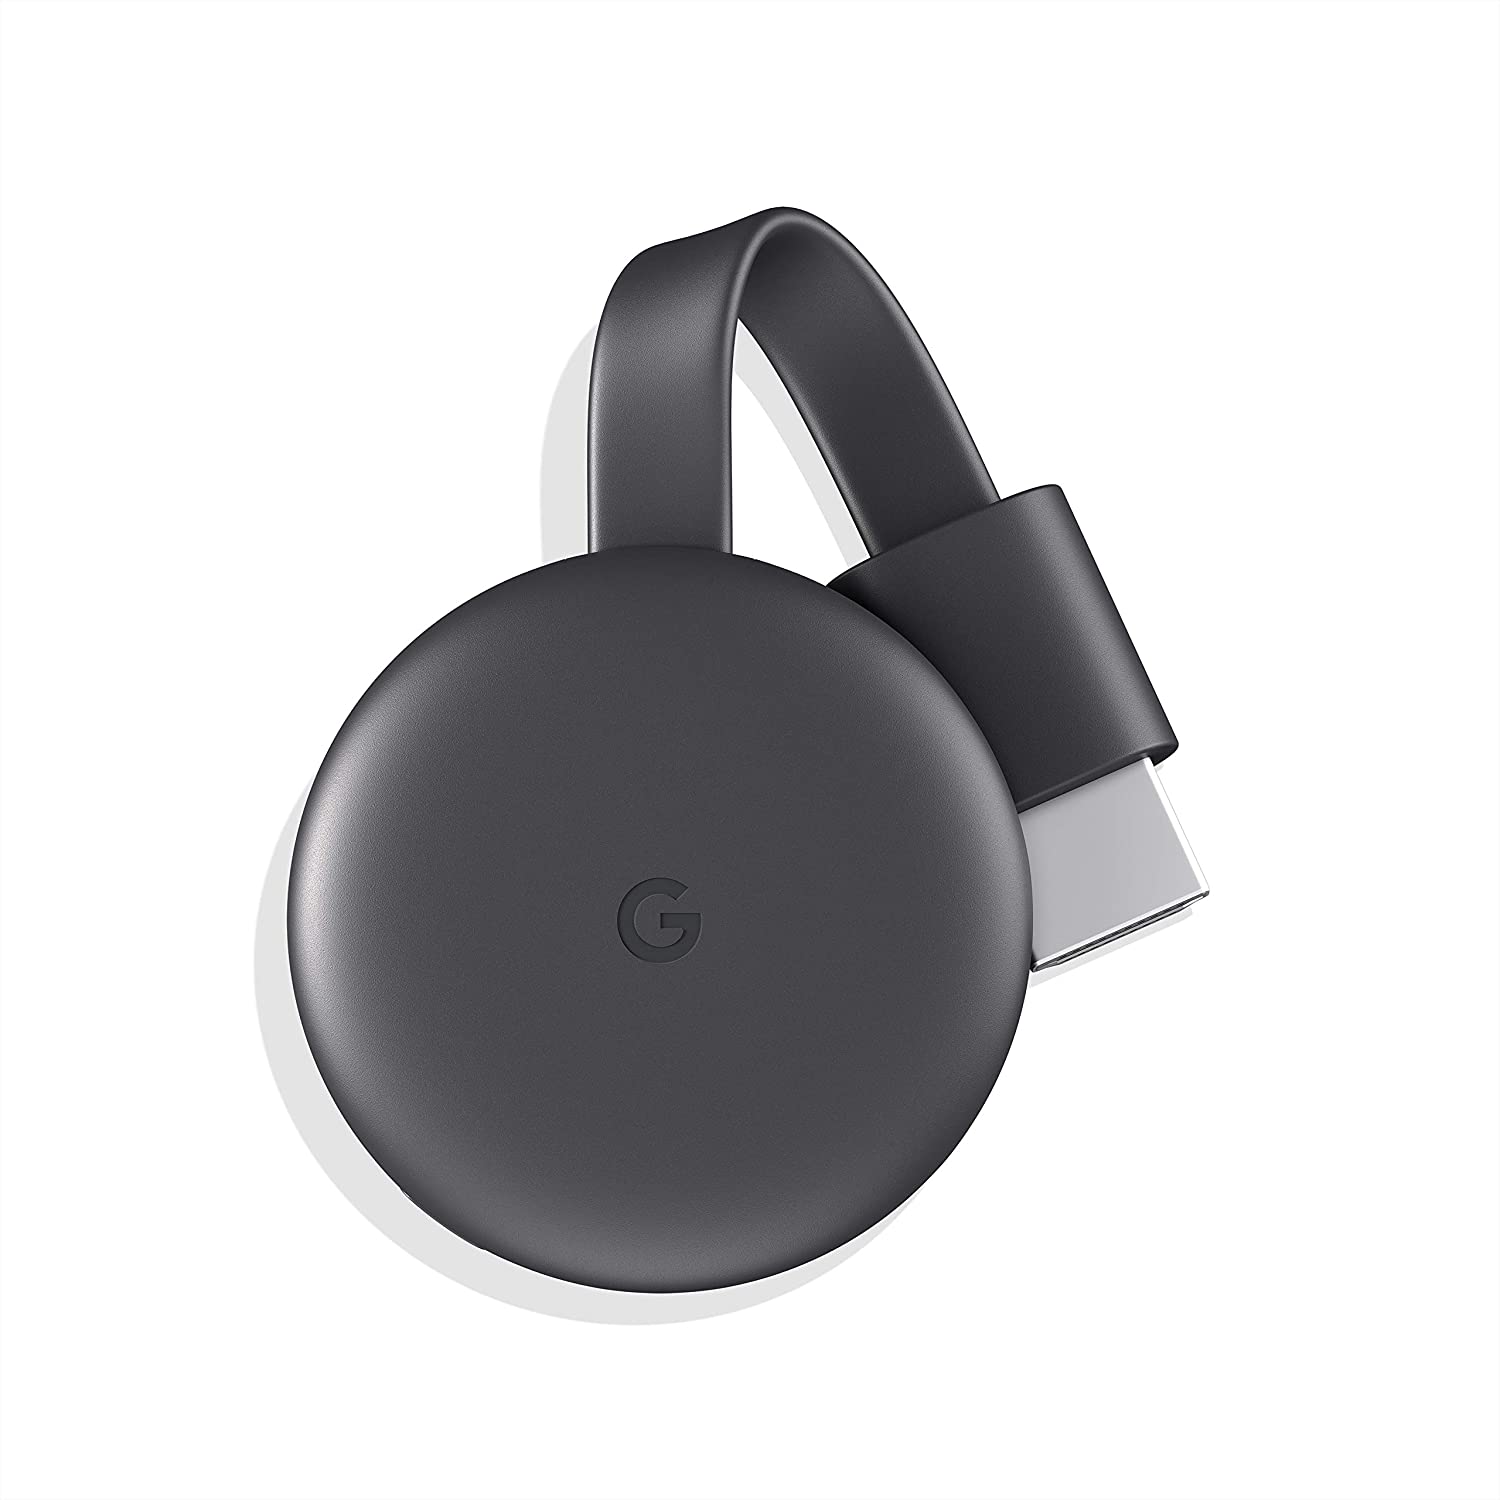 chromecast source not supported